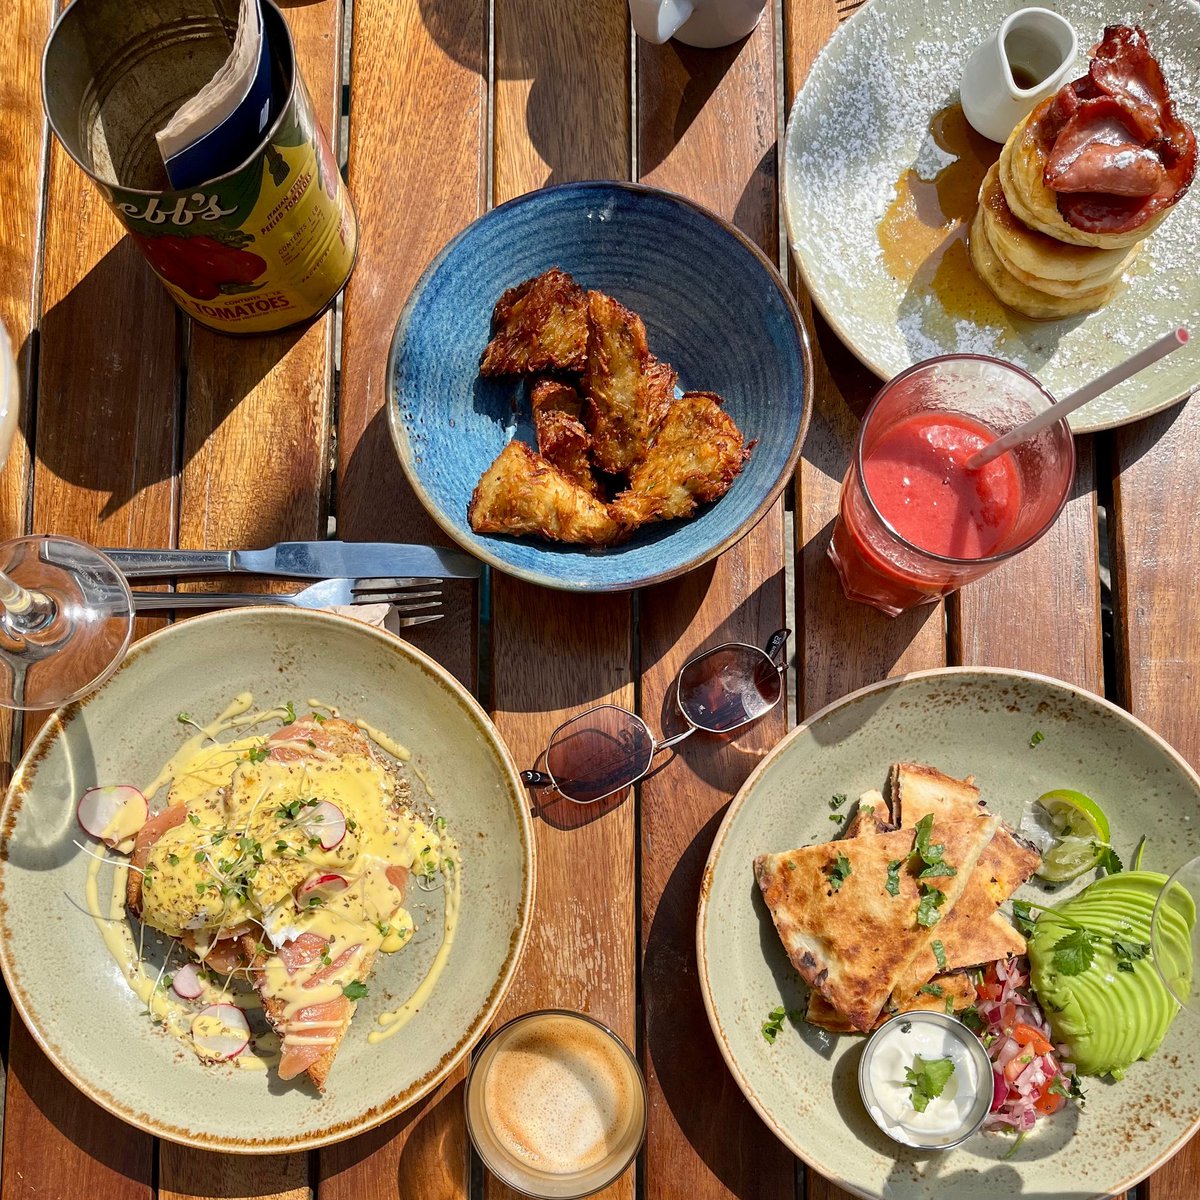 Meet you at our place. We’ll bring the brunch; you bring the factor 50 🌞🌞 . #letsbrunch #summervibes #weekendmode #breakfast #brunch #alfrescodining #bankholiday